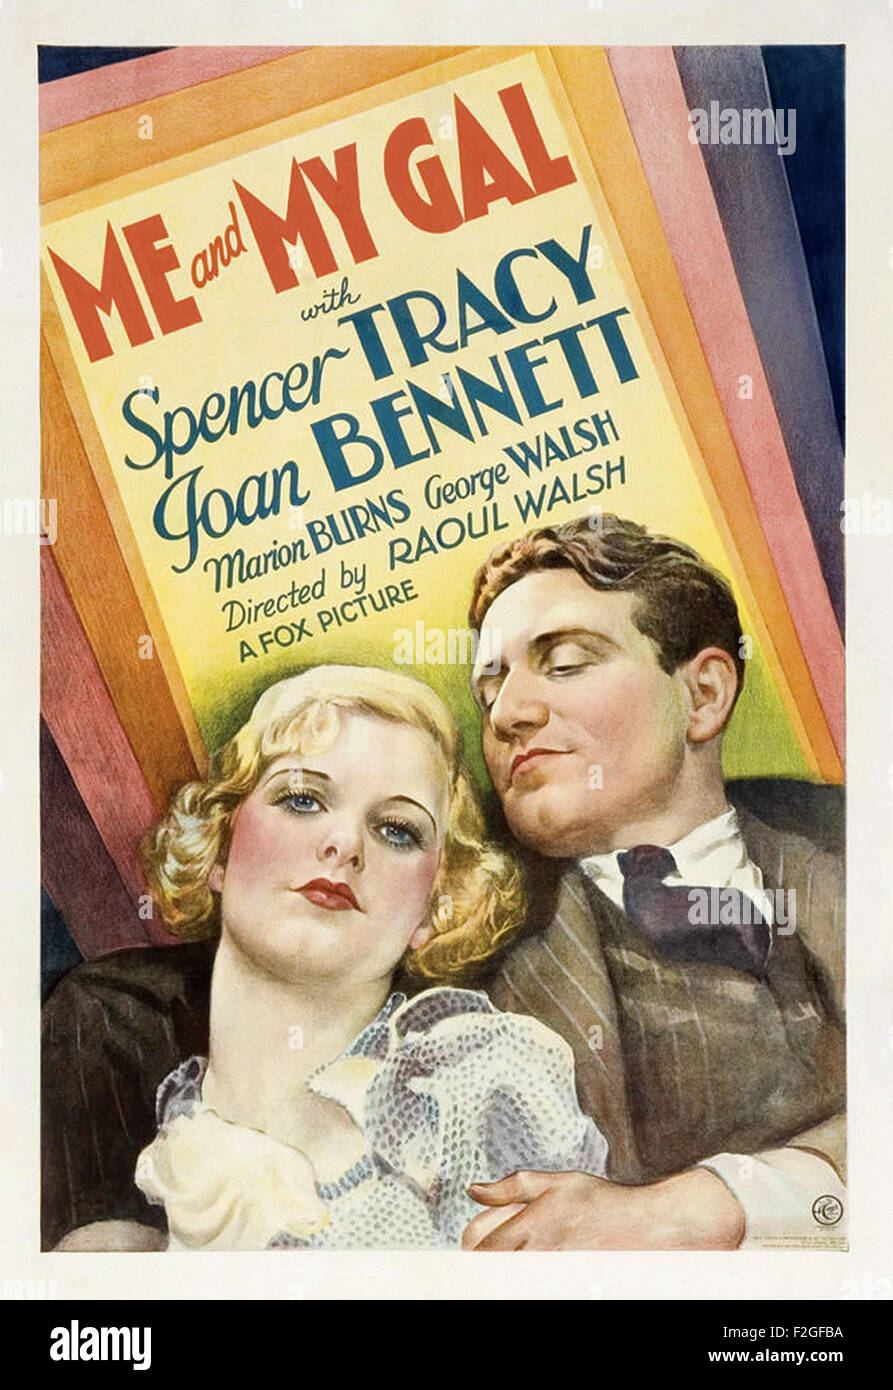 Me and My Gal (1932) 01 - Filmplakat Stockfoto